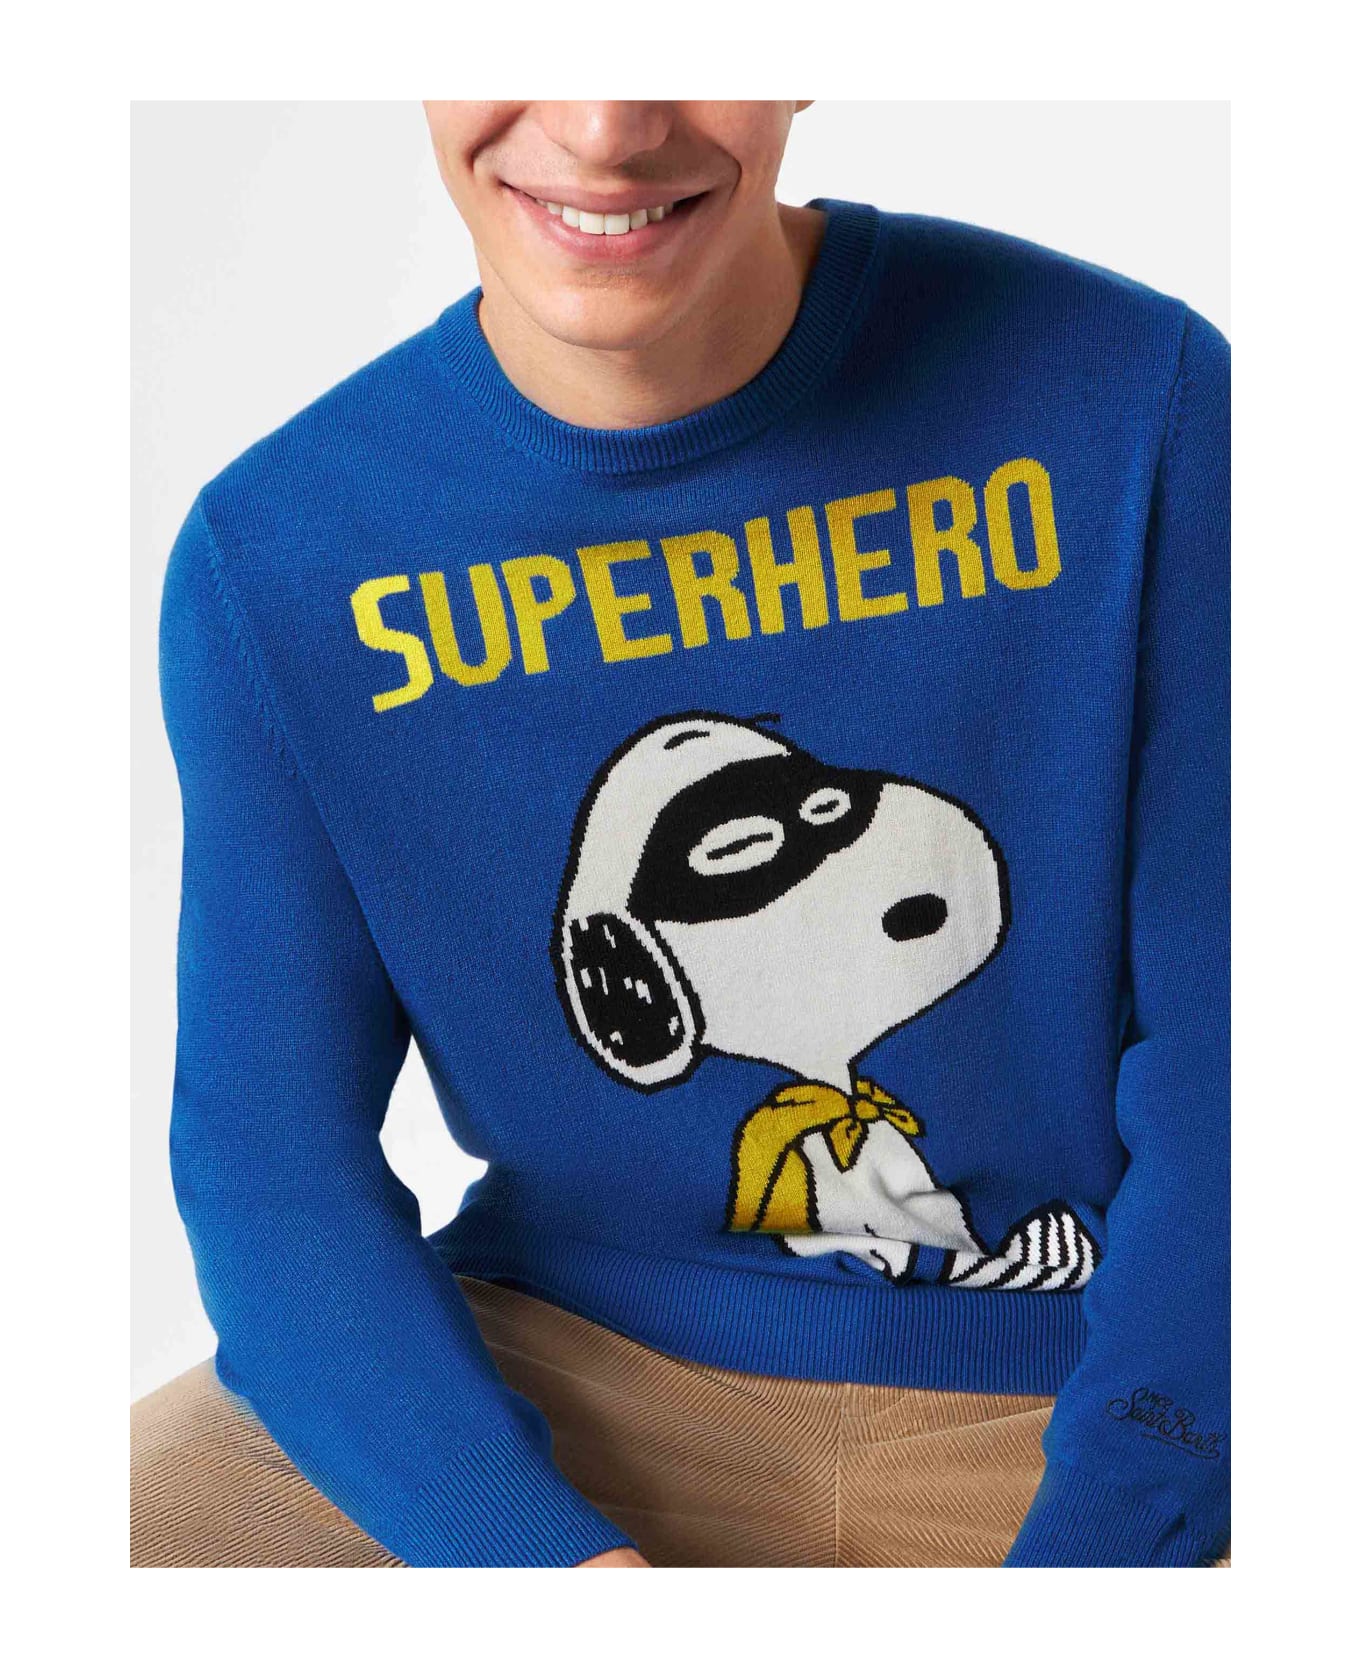 MC2 Saint Barth Man Lightweight Sweater With Snoopy Jacquard Print | Snoopy Peanuts Special Edition - BLUE